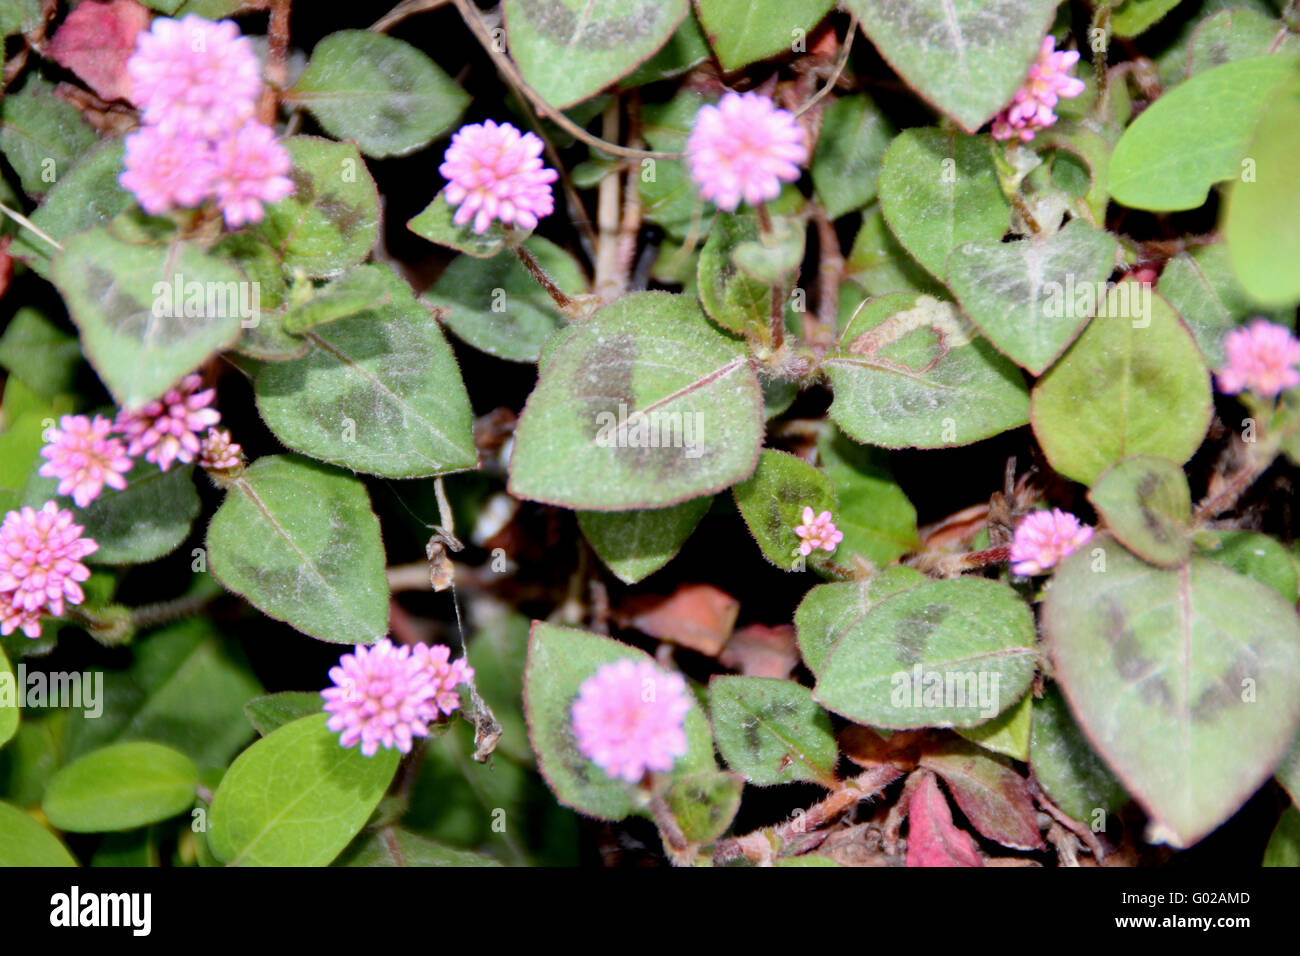 Persicaria capitata, family Polygonaceae, creeping perennial herb with ovate leaves with two purple patches  and pink flowers Stock Photo